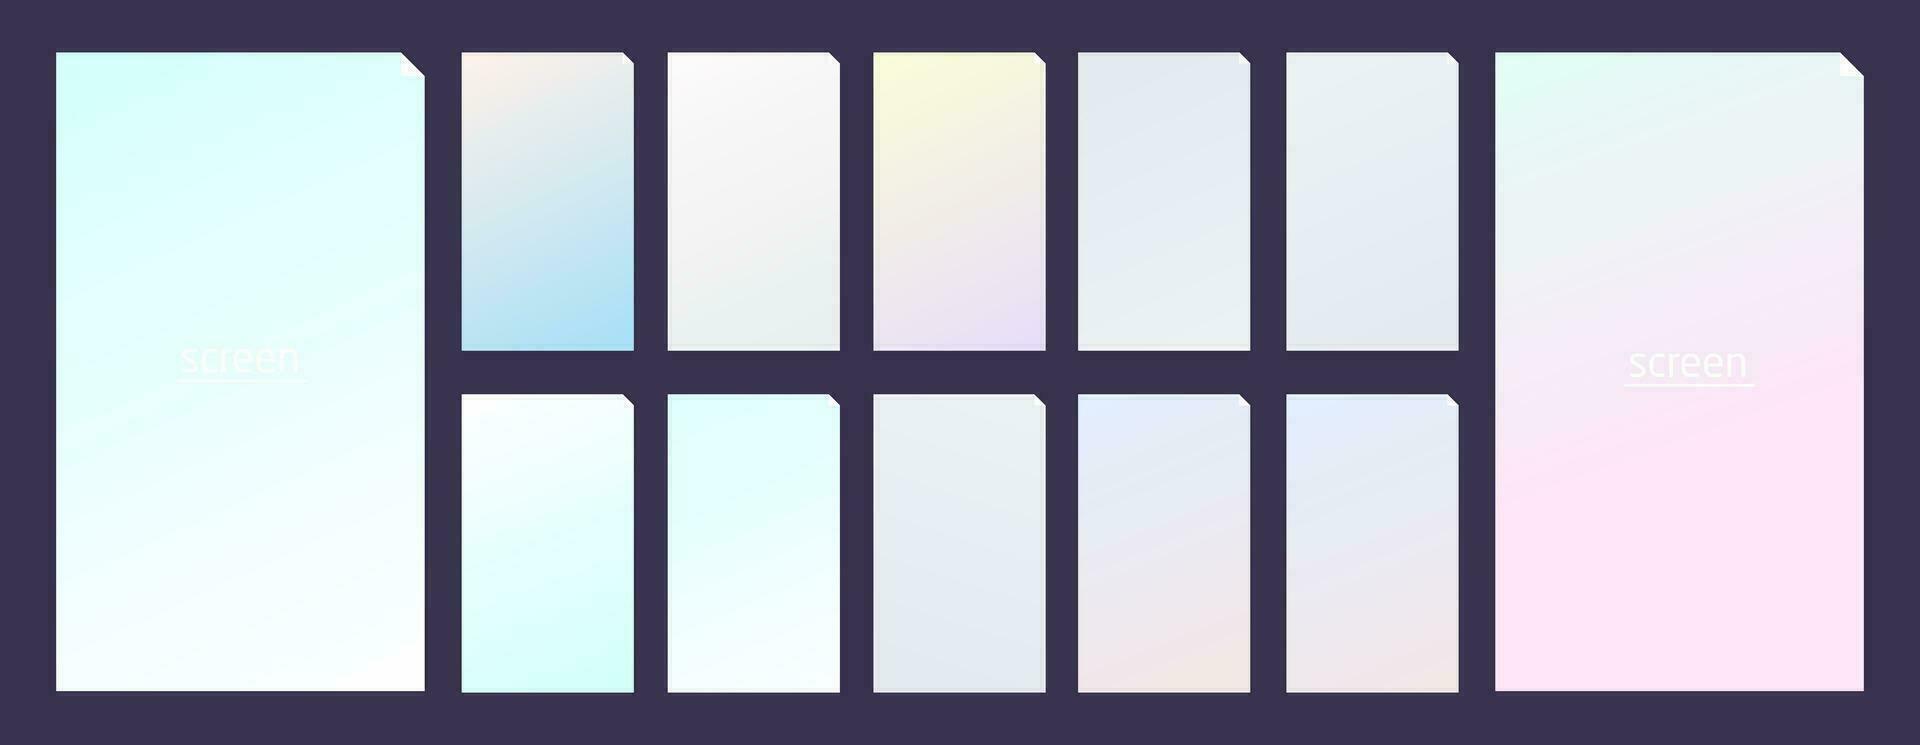 Soft pastel gradient smooth and vibrant color background set for devices vector